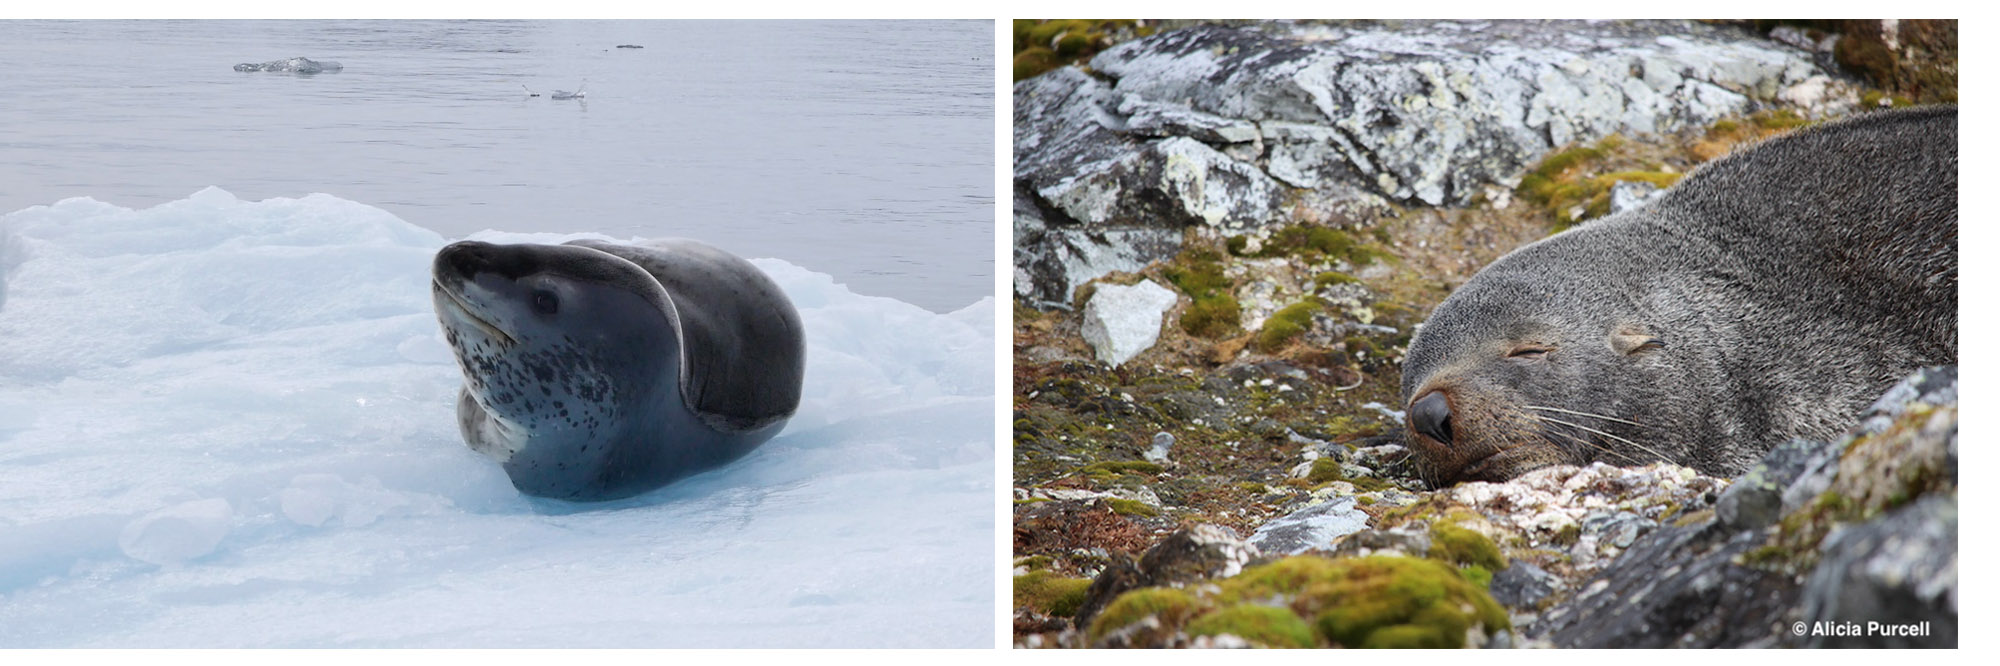 leopard seal and fur seal